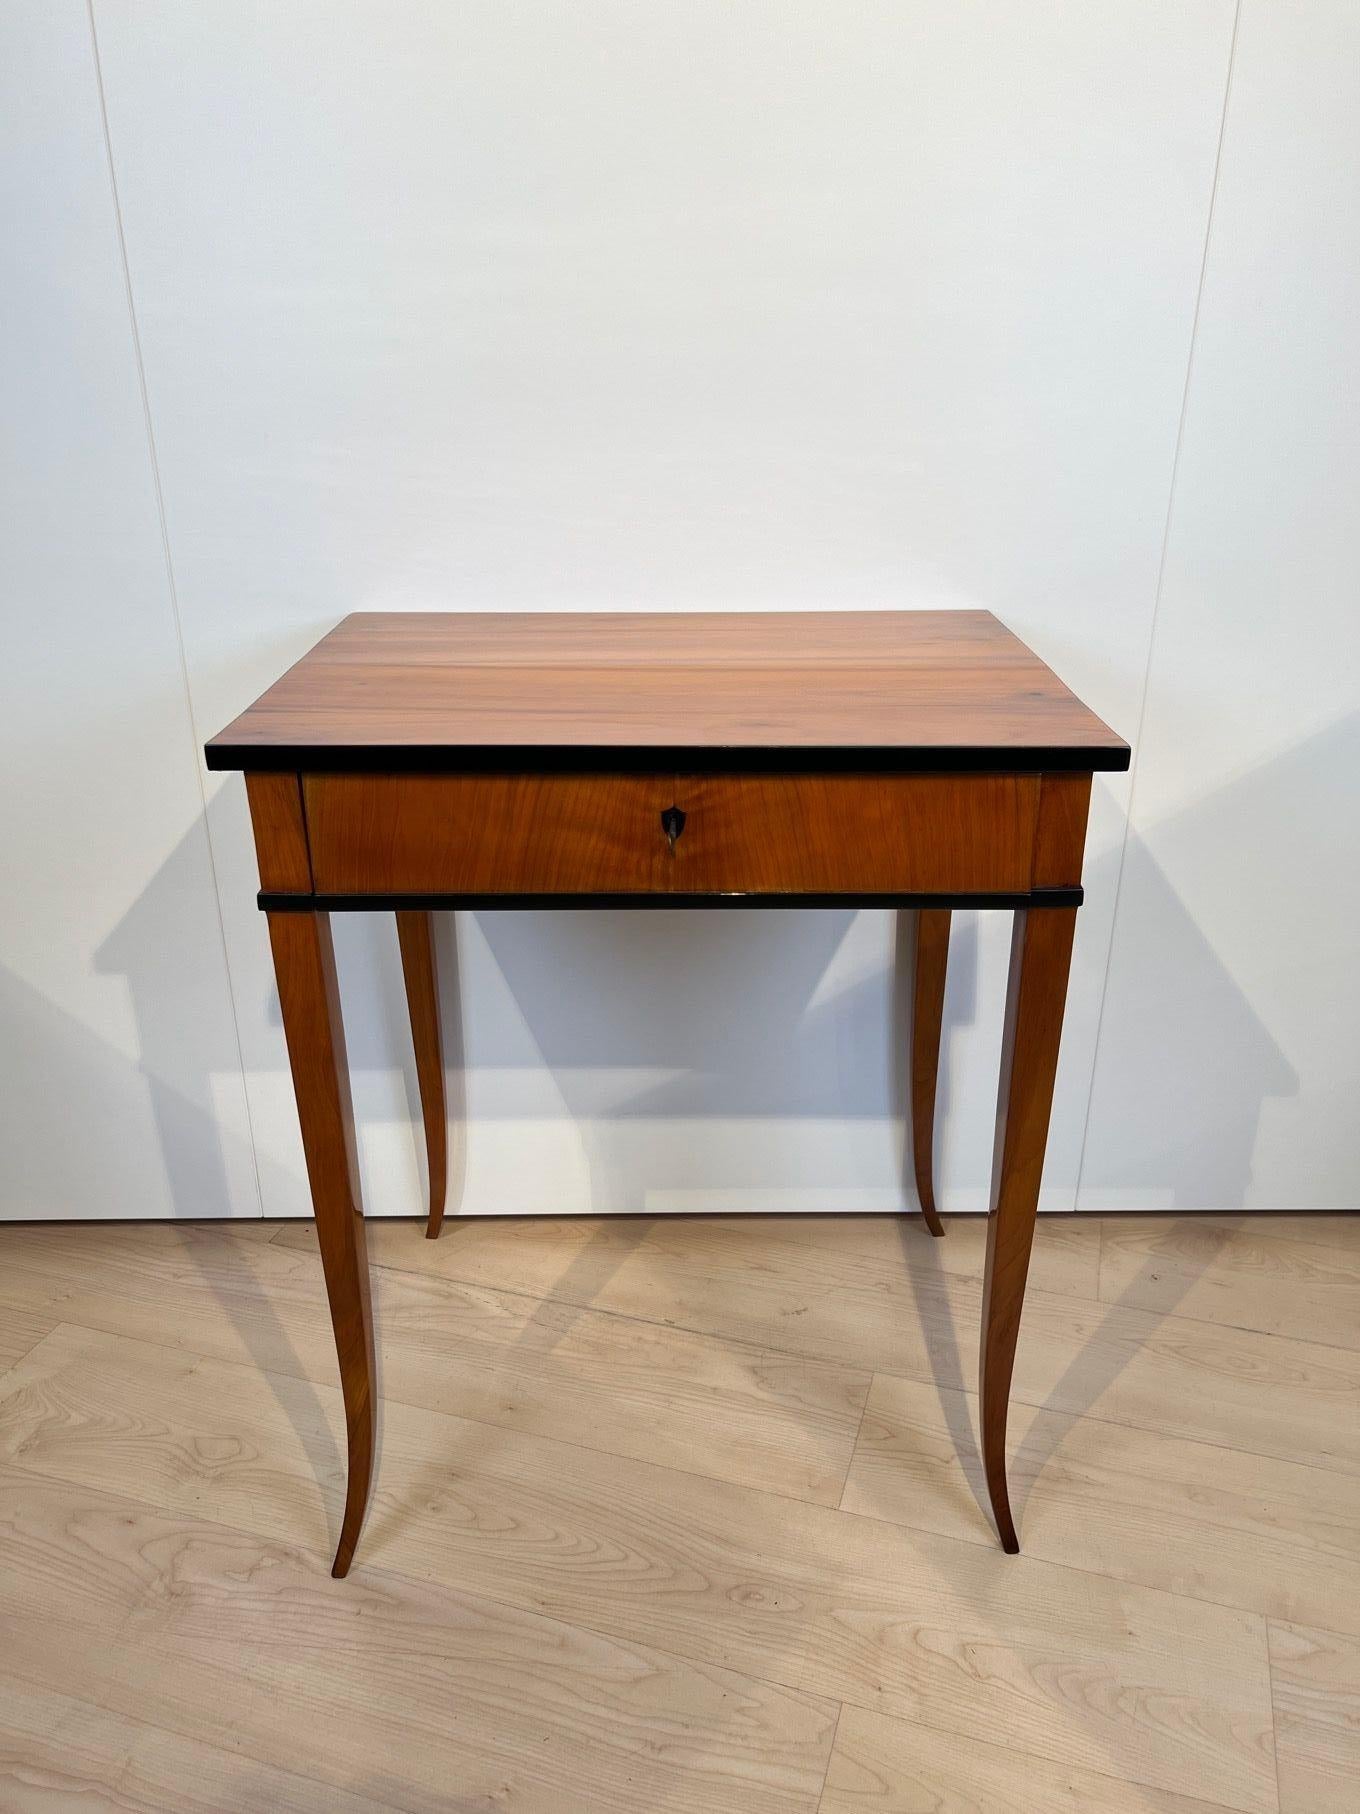 Elegant rectangular Biedermeier sewing or side table, cherry tree, south Germany around 1825.
Cherry wood veneered and solid. Drawer with original sewing equipment.
Elegant, curved square tapered legs. Restored and hand polished with